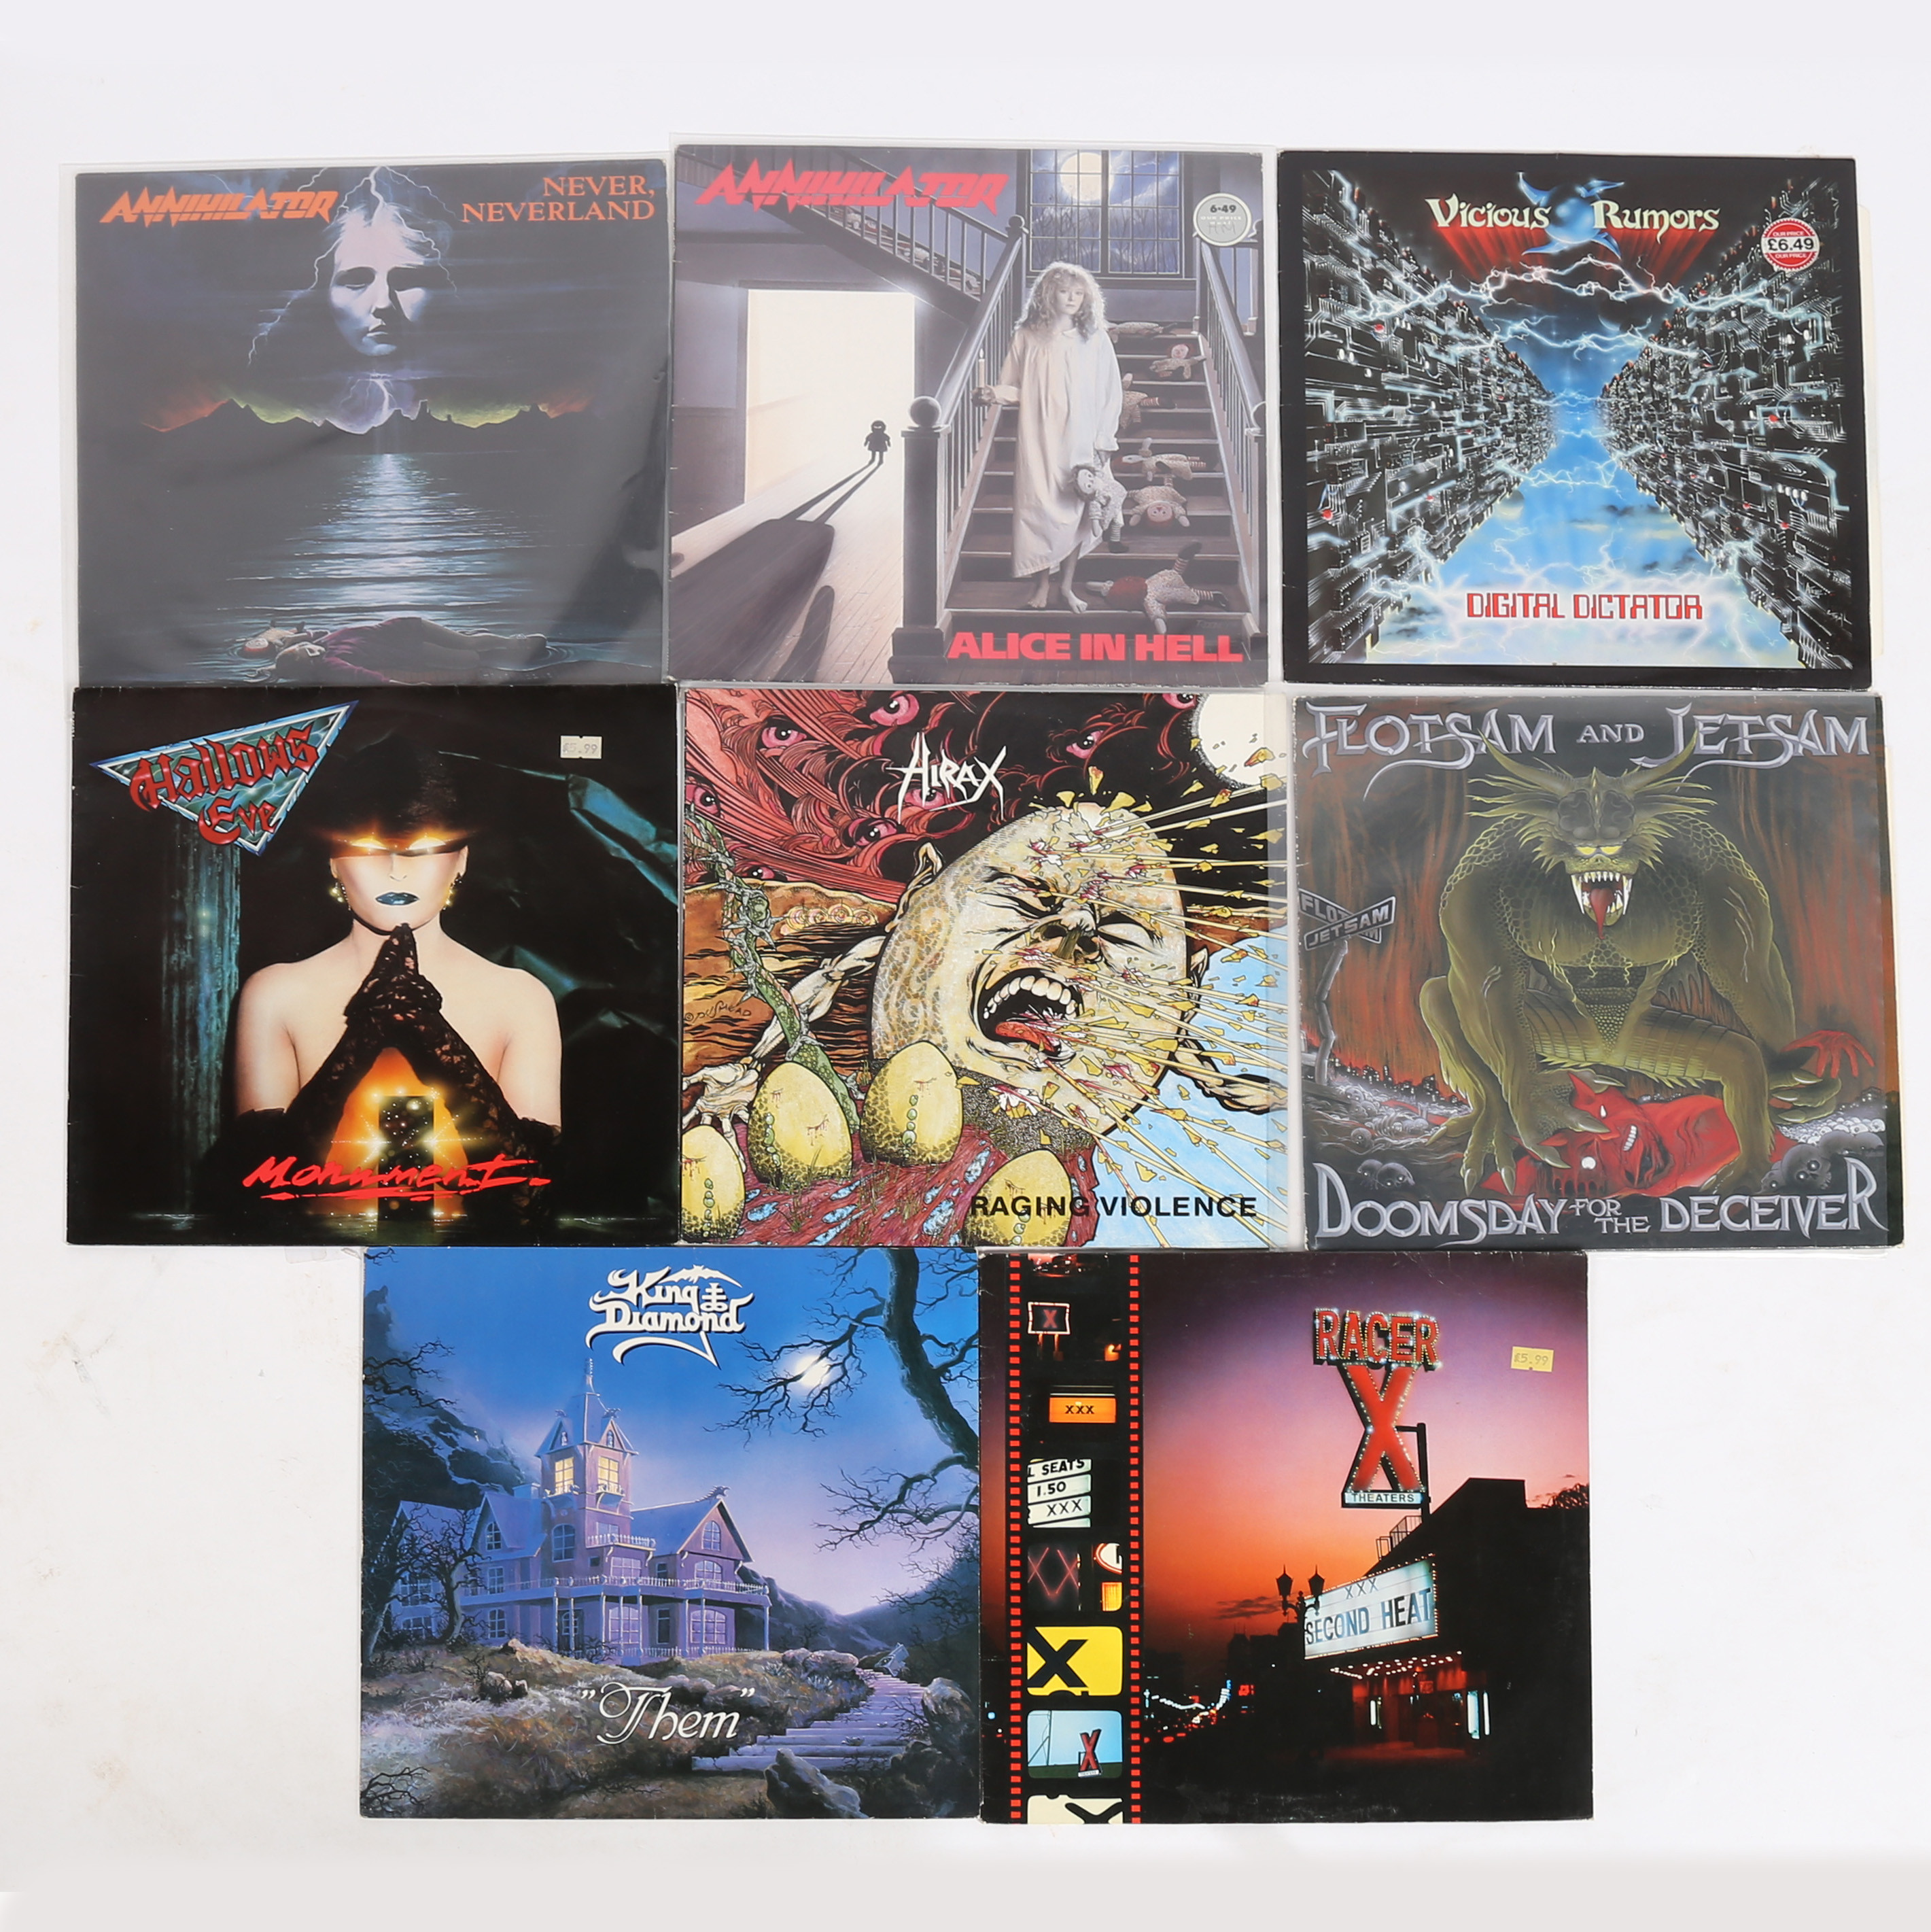 ROADRUNNER RECORDS - LP COLLECTION.